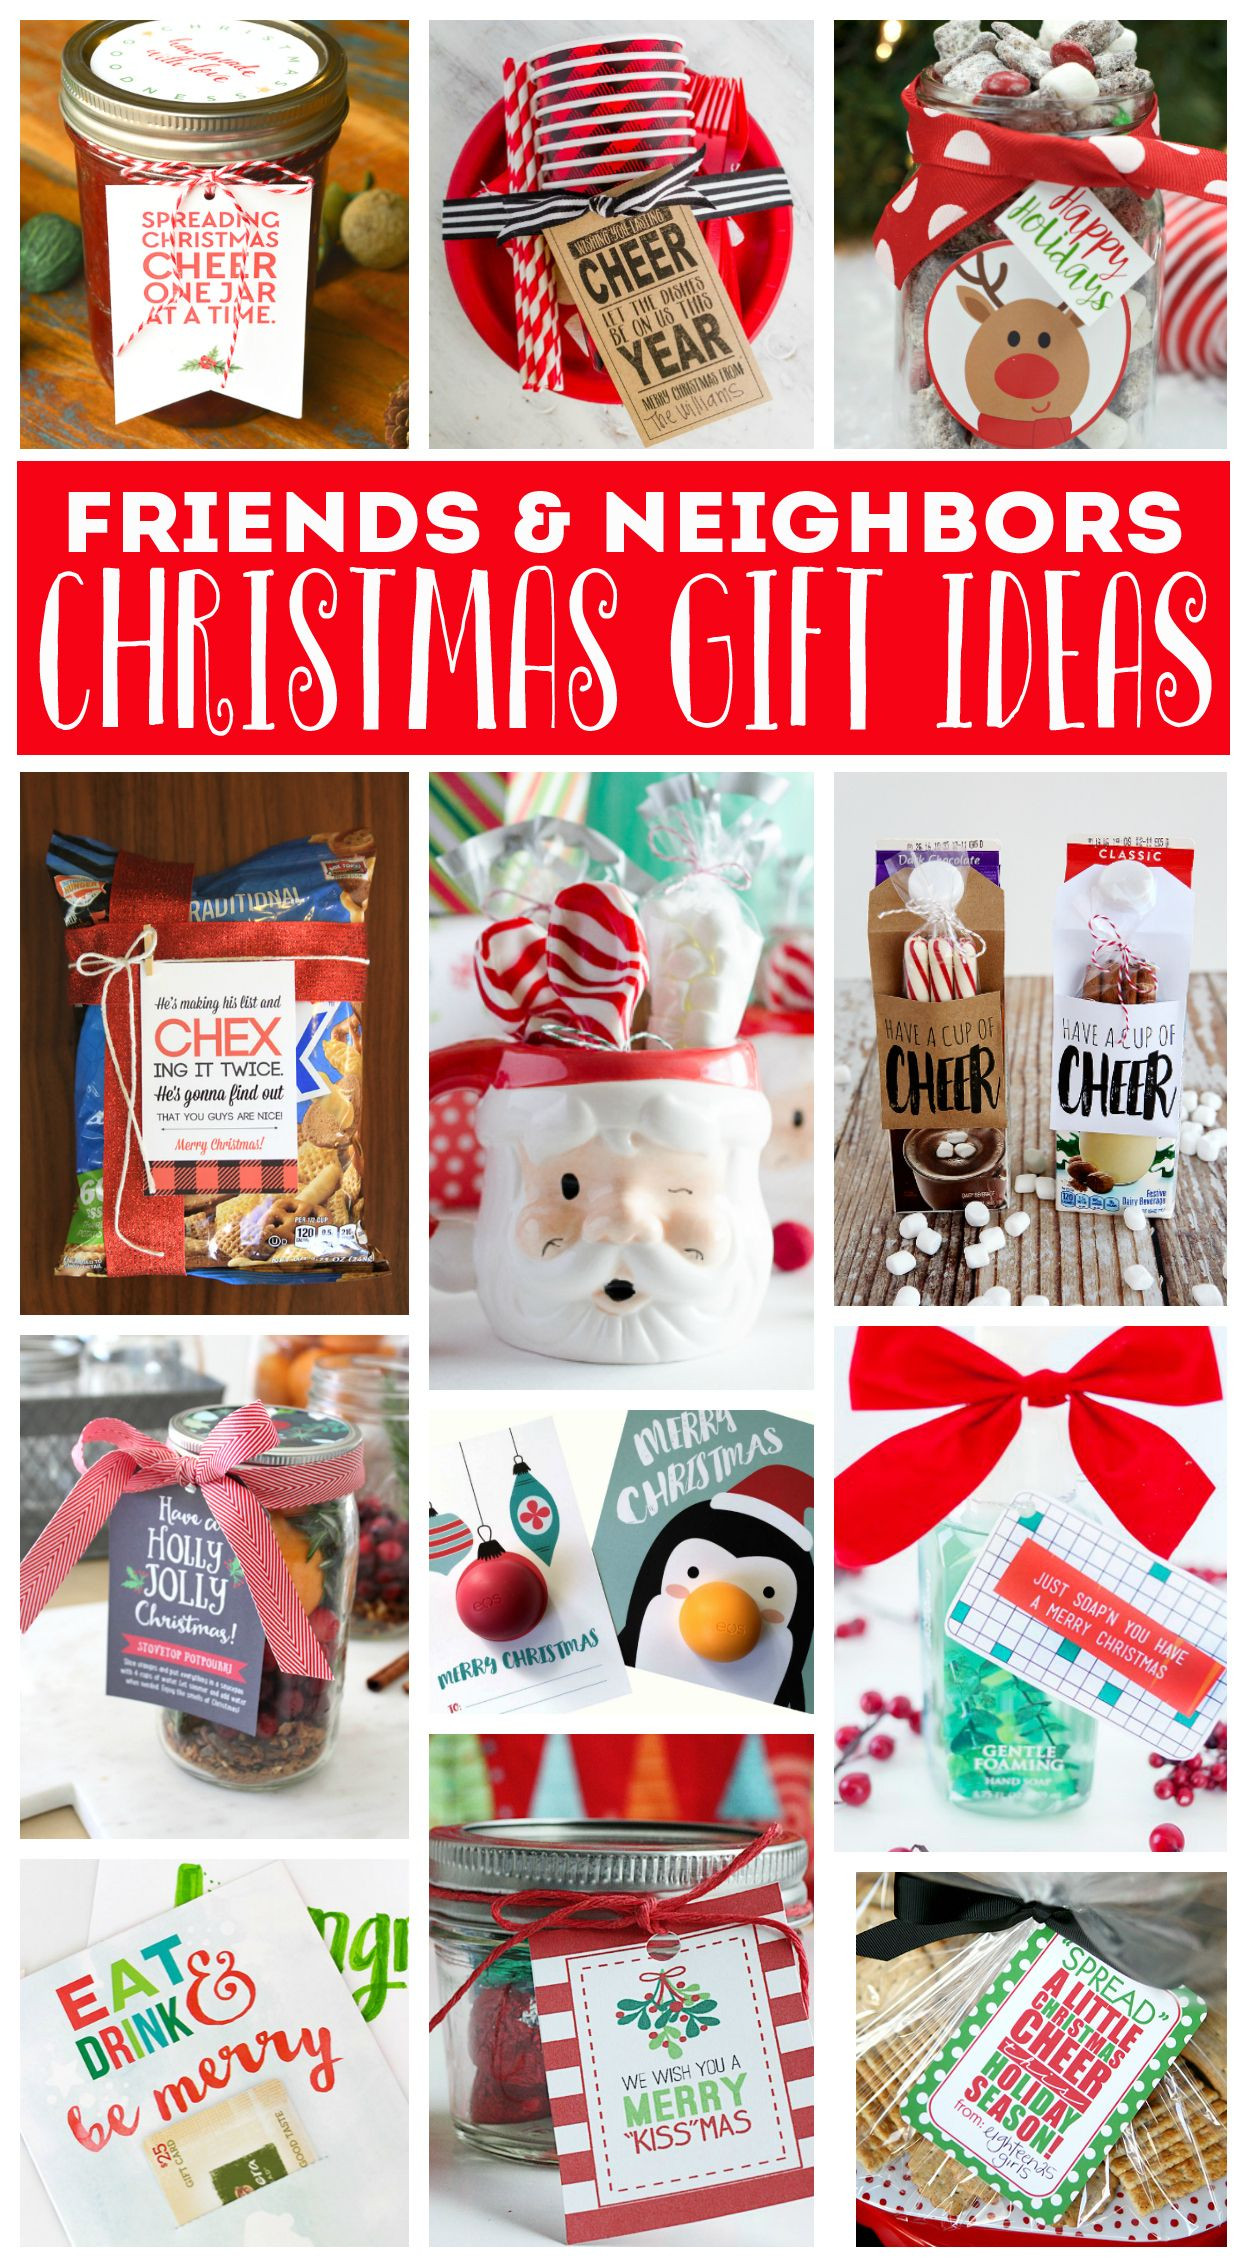 Holiday Cheap Gift Ideas
 Neighbor Christmas Gifts Everyone Is Sure To Love